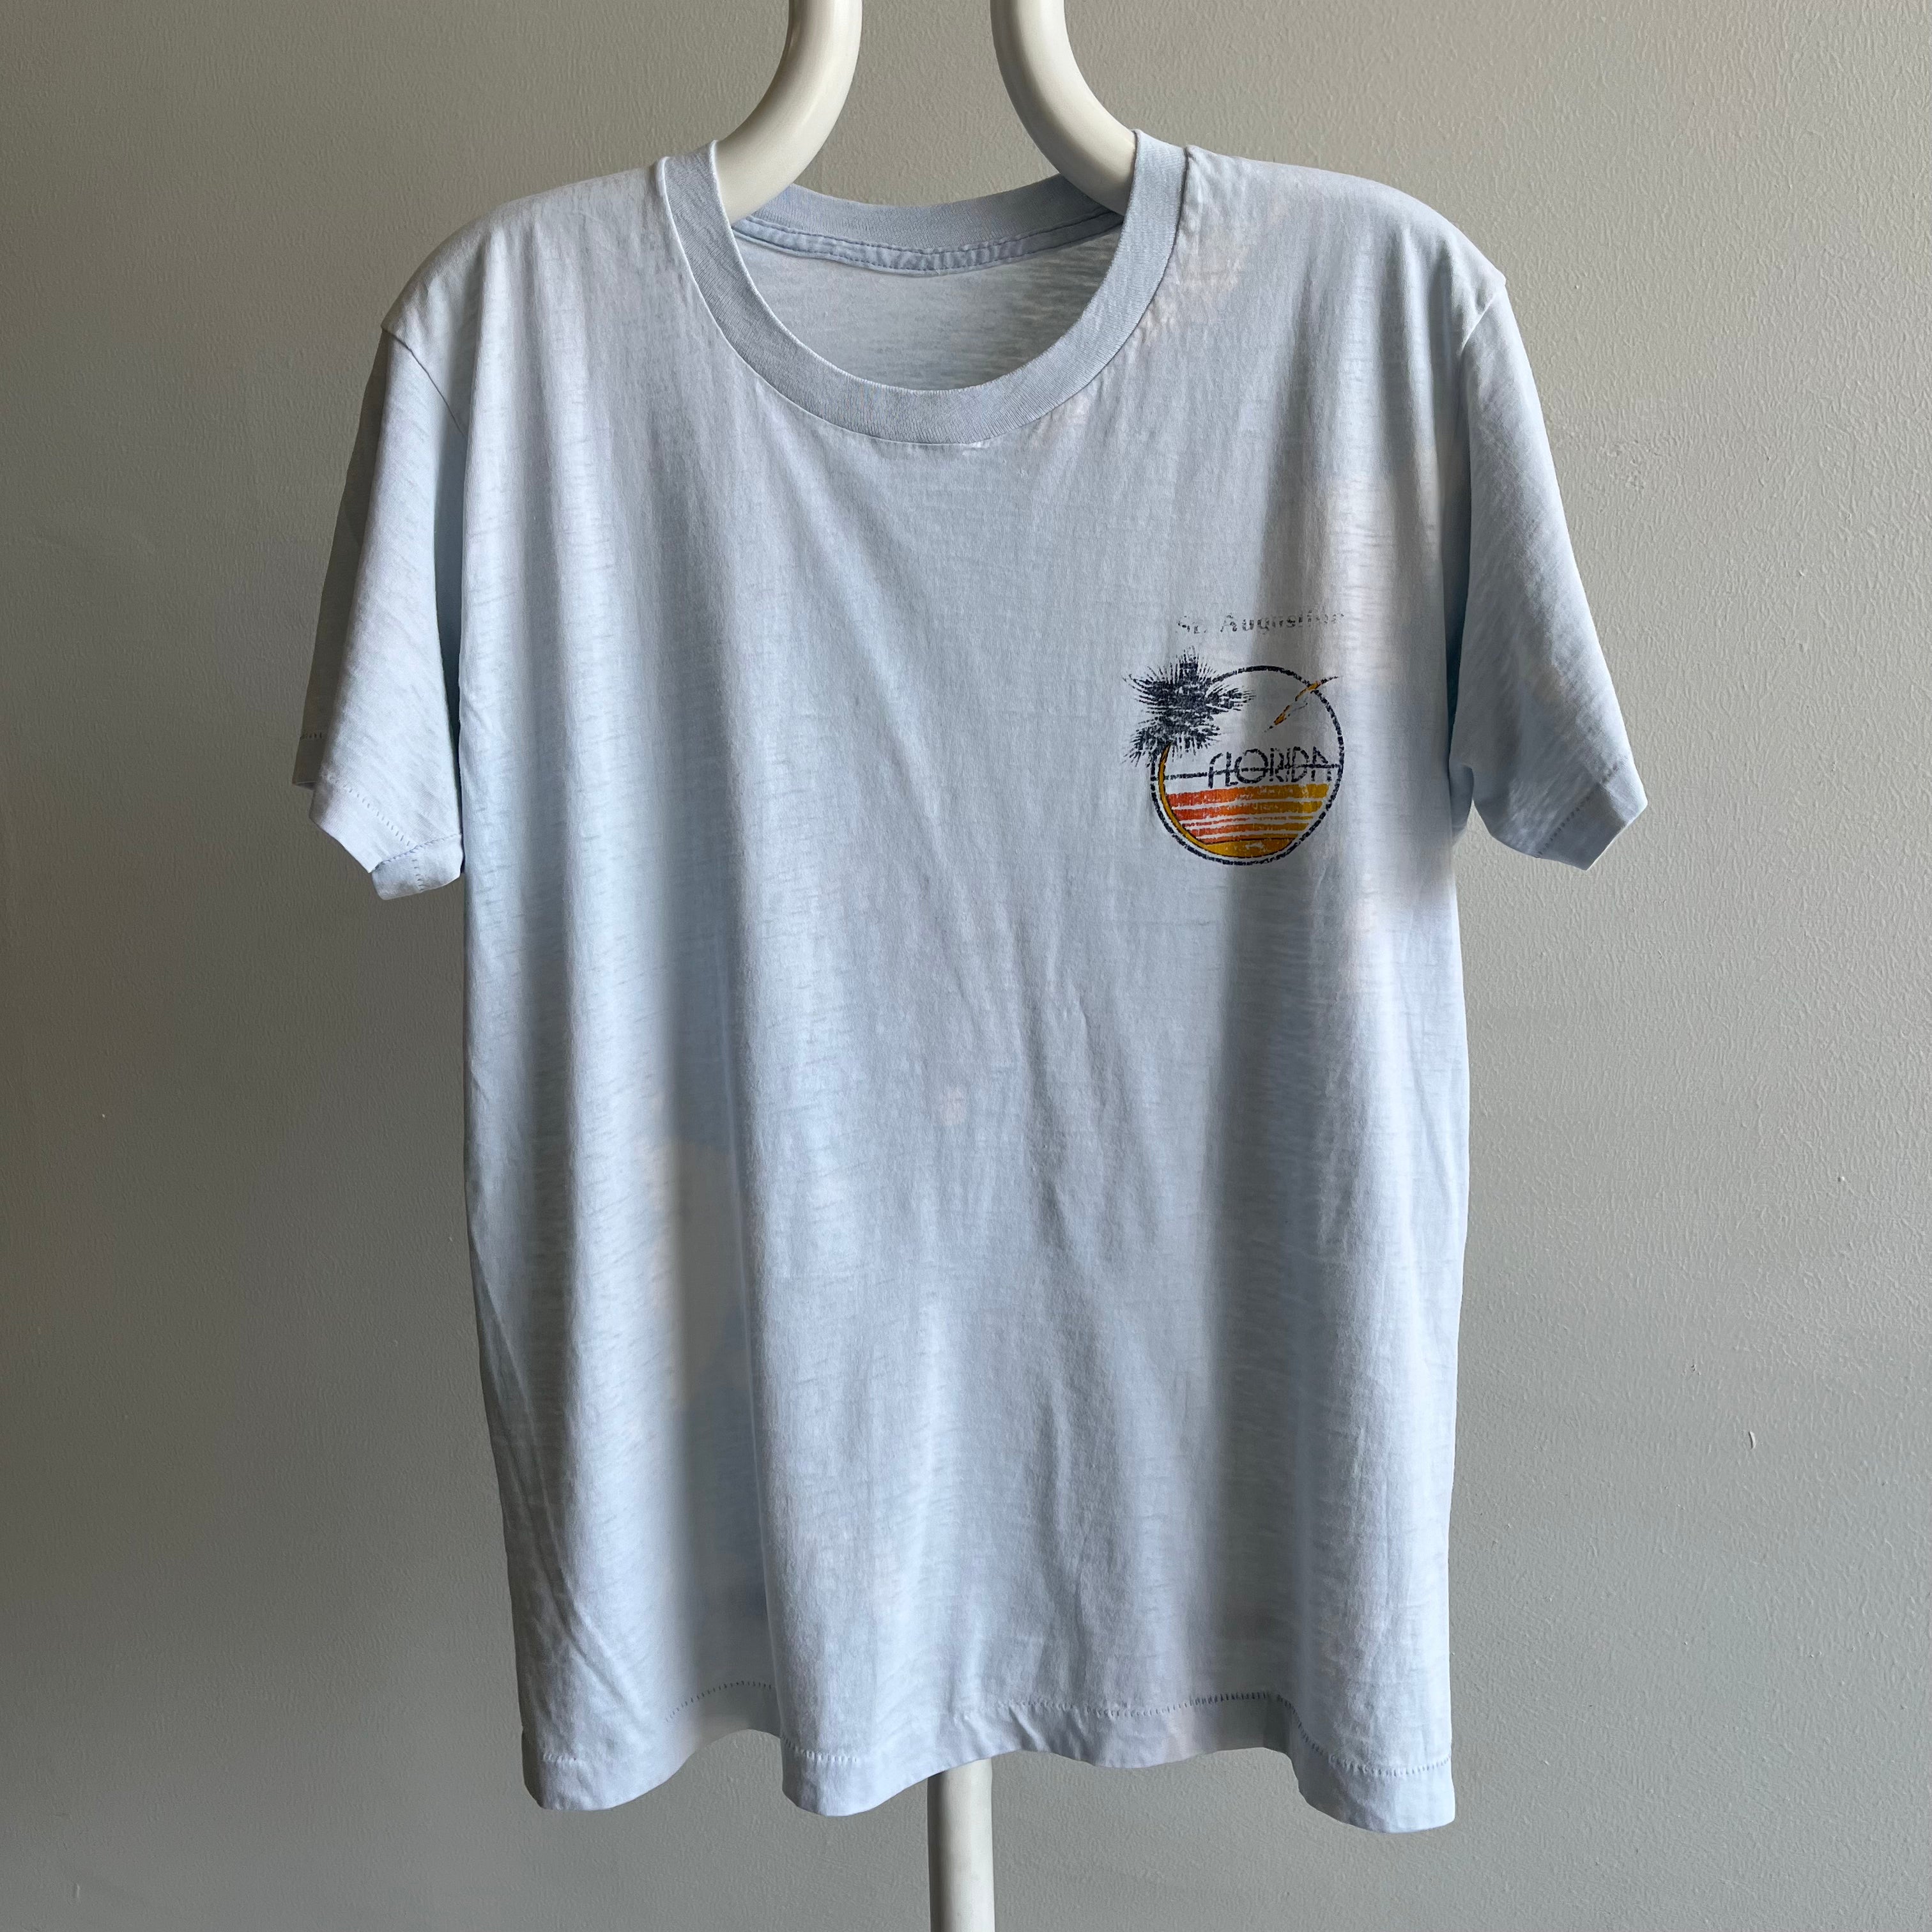 1970s Thinned Out Bleached Out St. Augustine, Florida Tourist T-Shirt